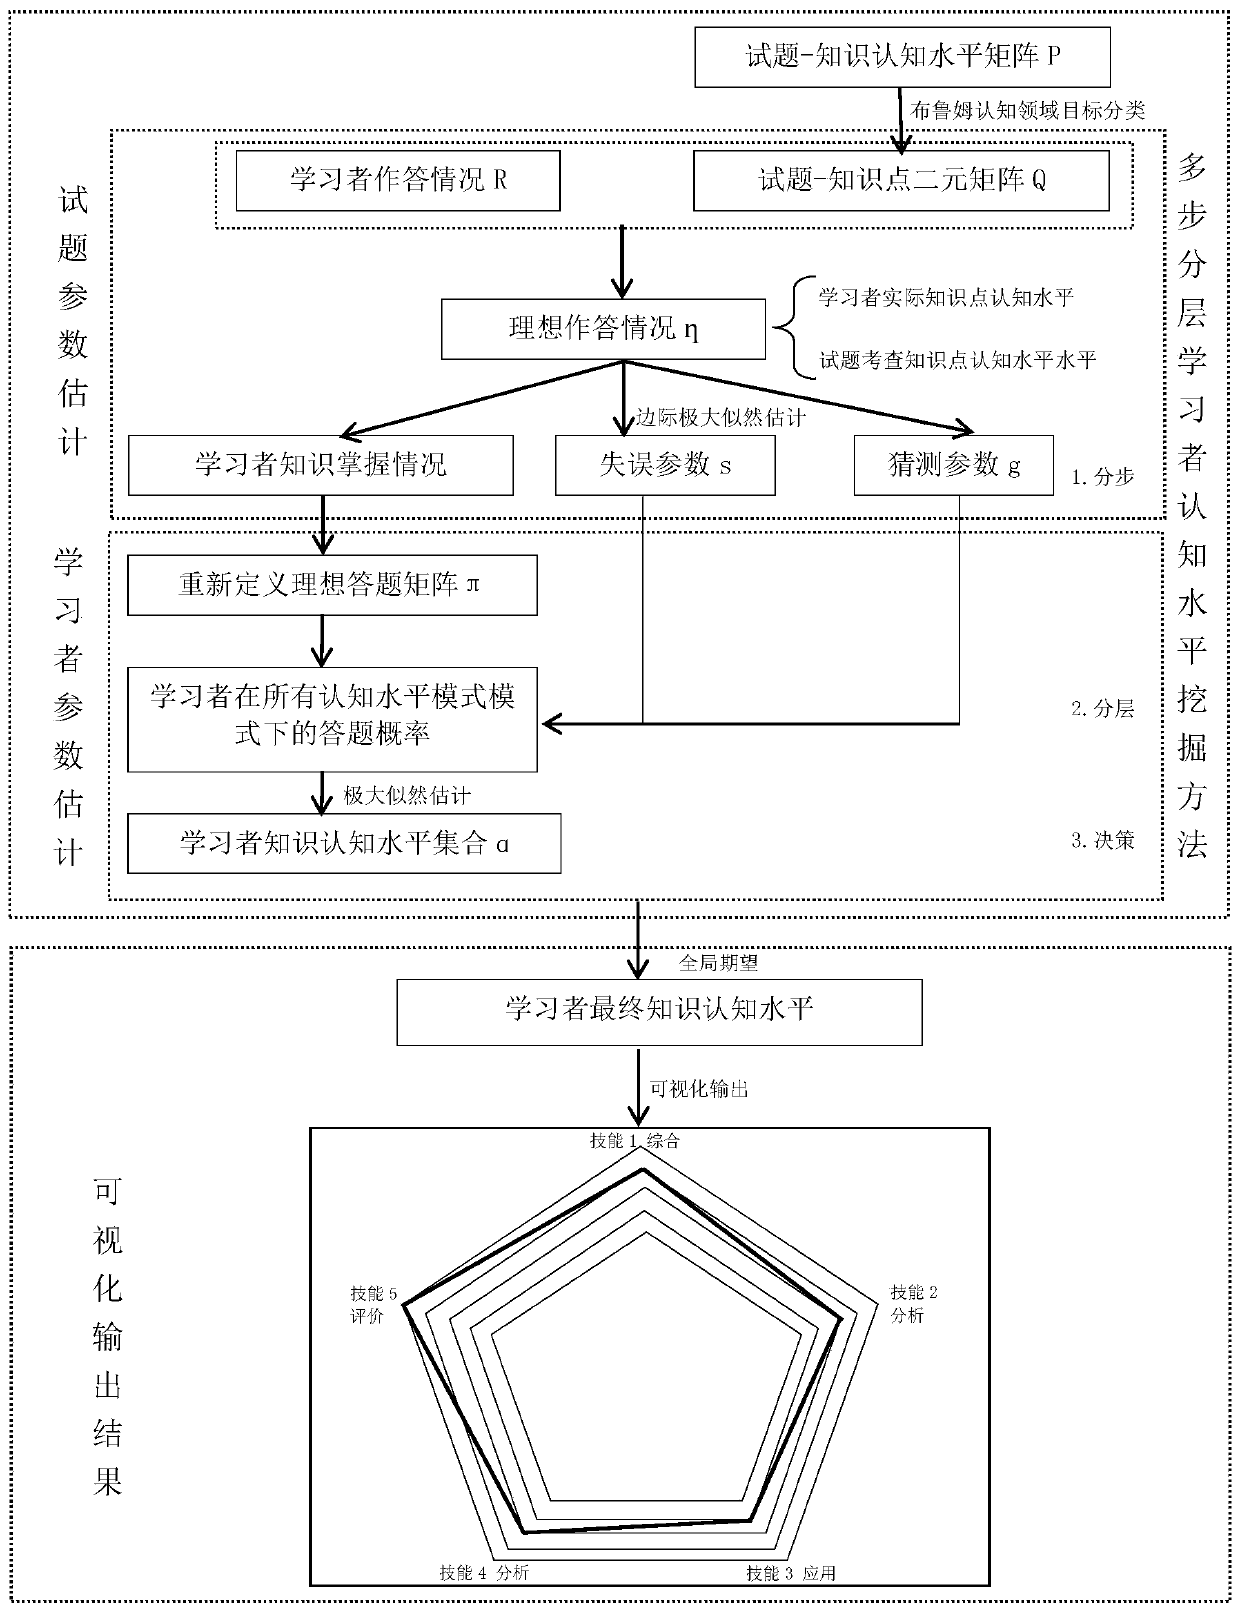 Multi-step hierarchical learner cognitive level mining method and system